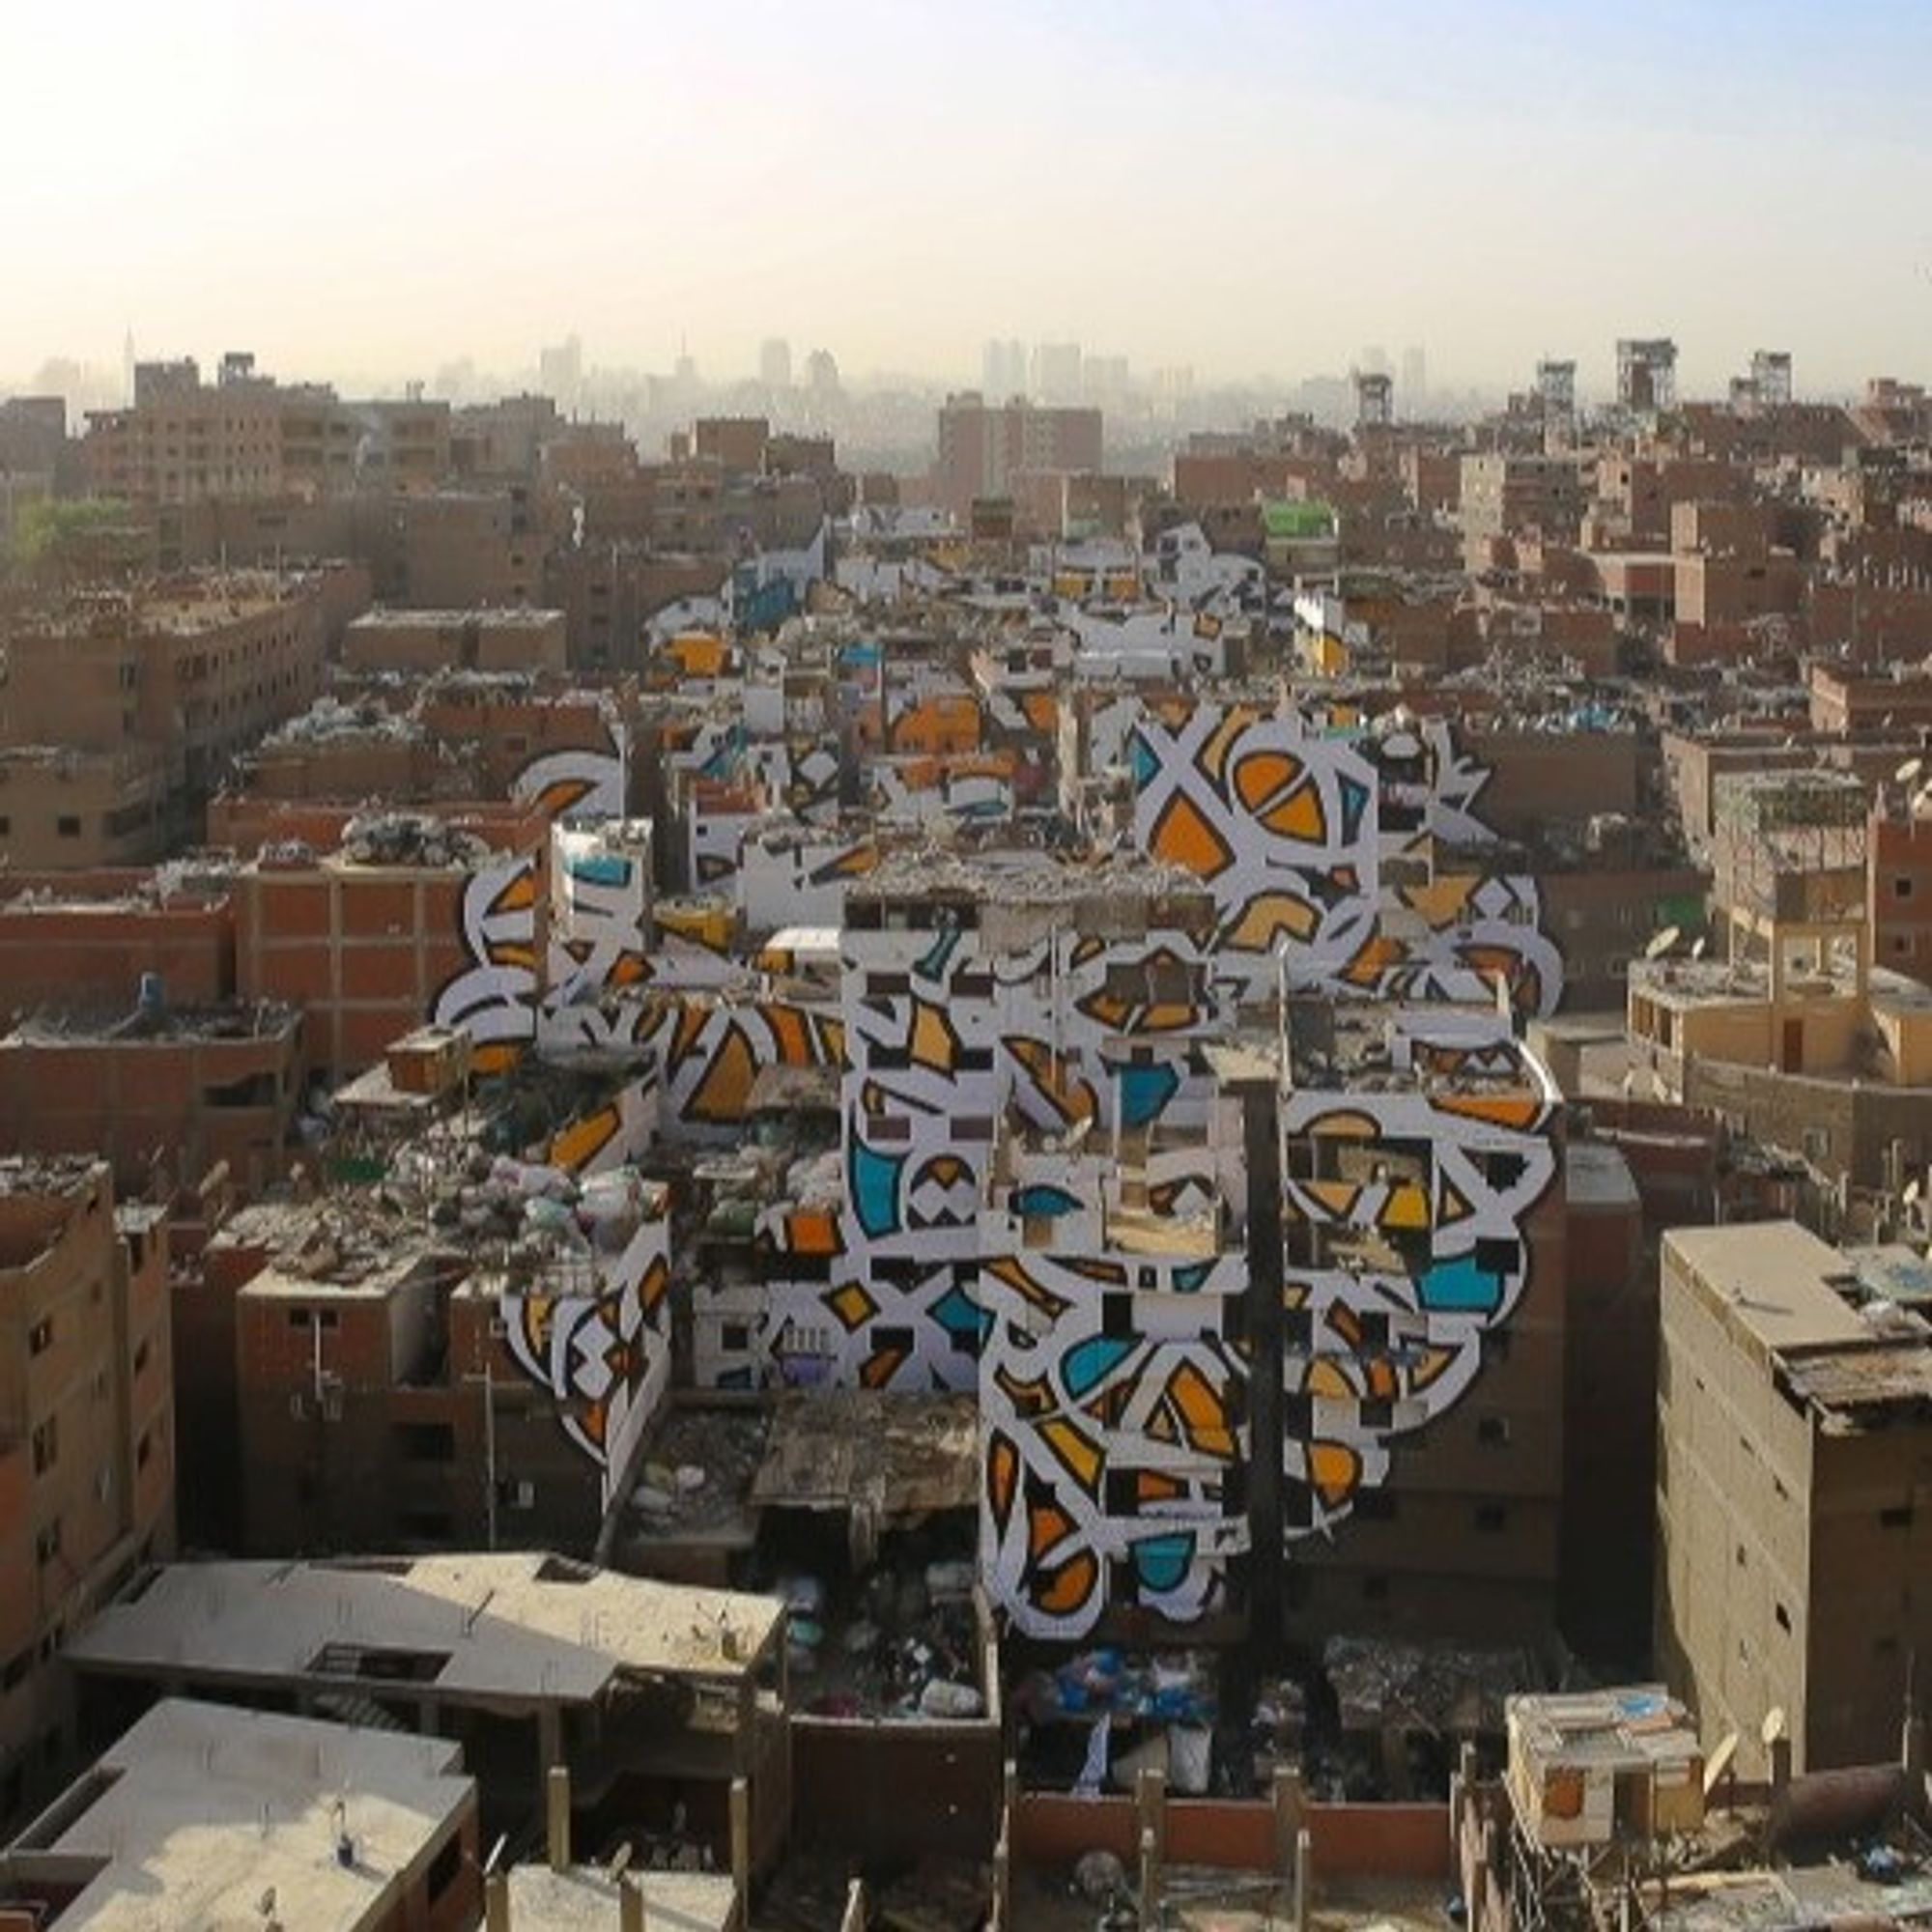 eL Seed - Le Caire, 2016  https://elseed-art.com/projects/perception-cairo/